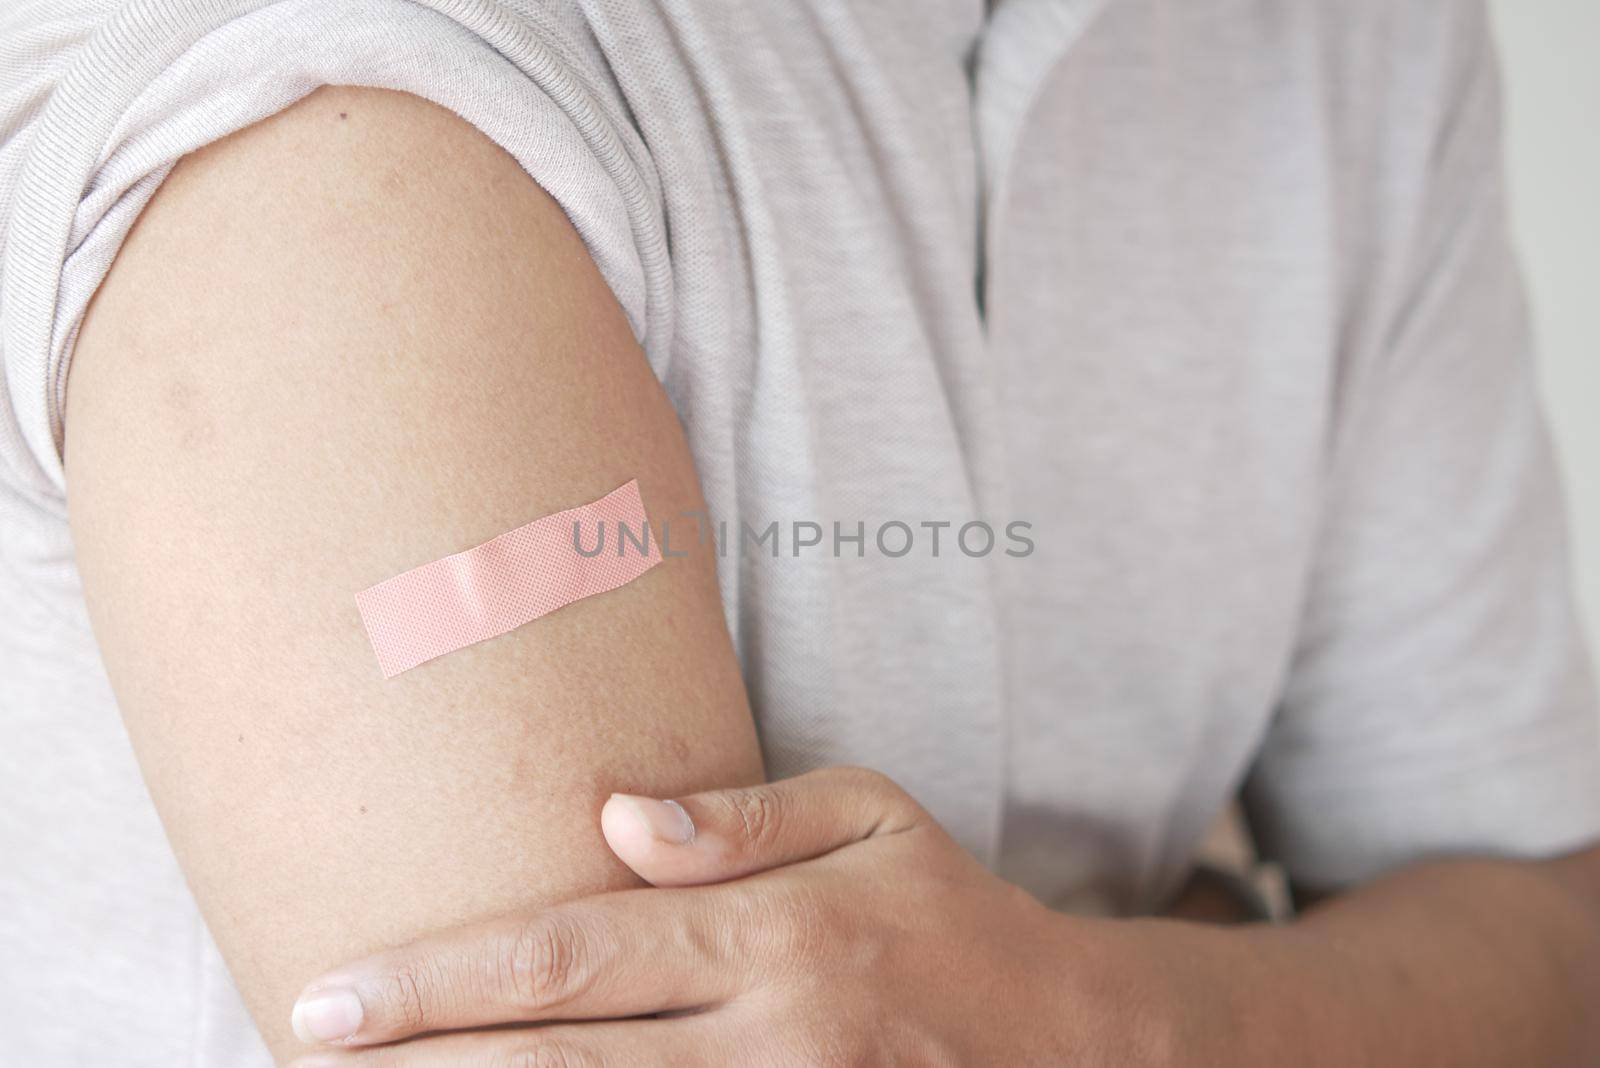 adhesive bandage on young man's arm by towfiq007